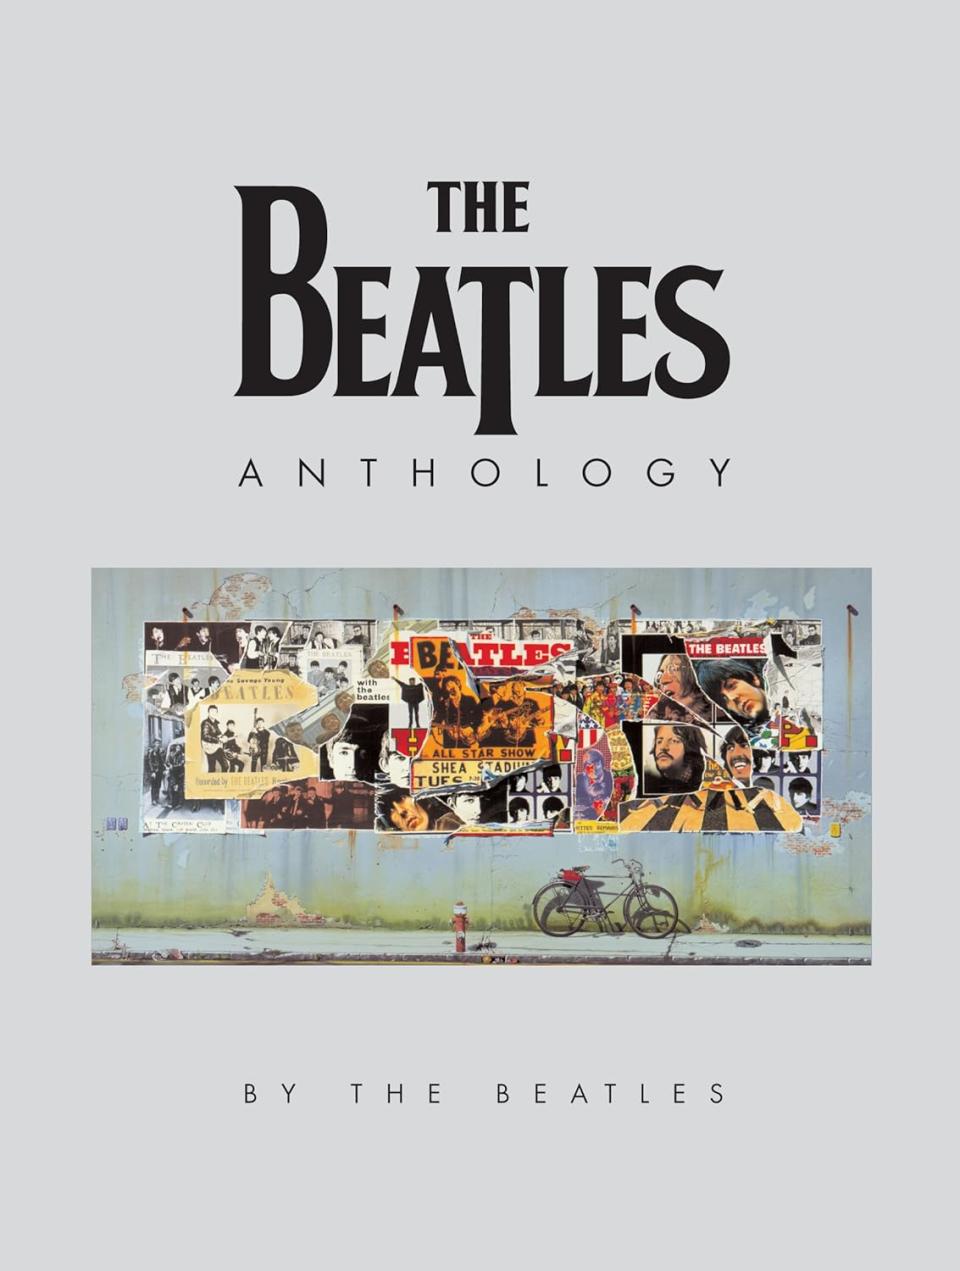 11 Best Beatles Merch and Books for Every Type of Fan